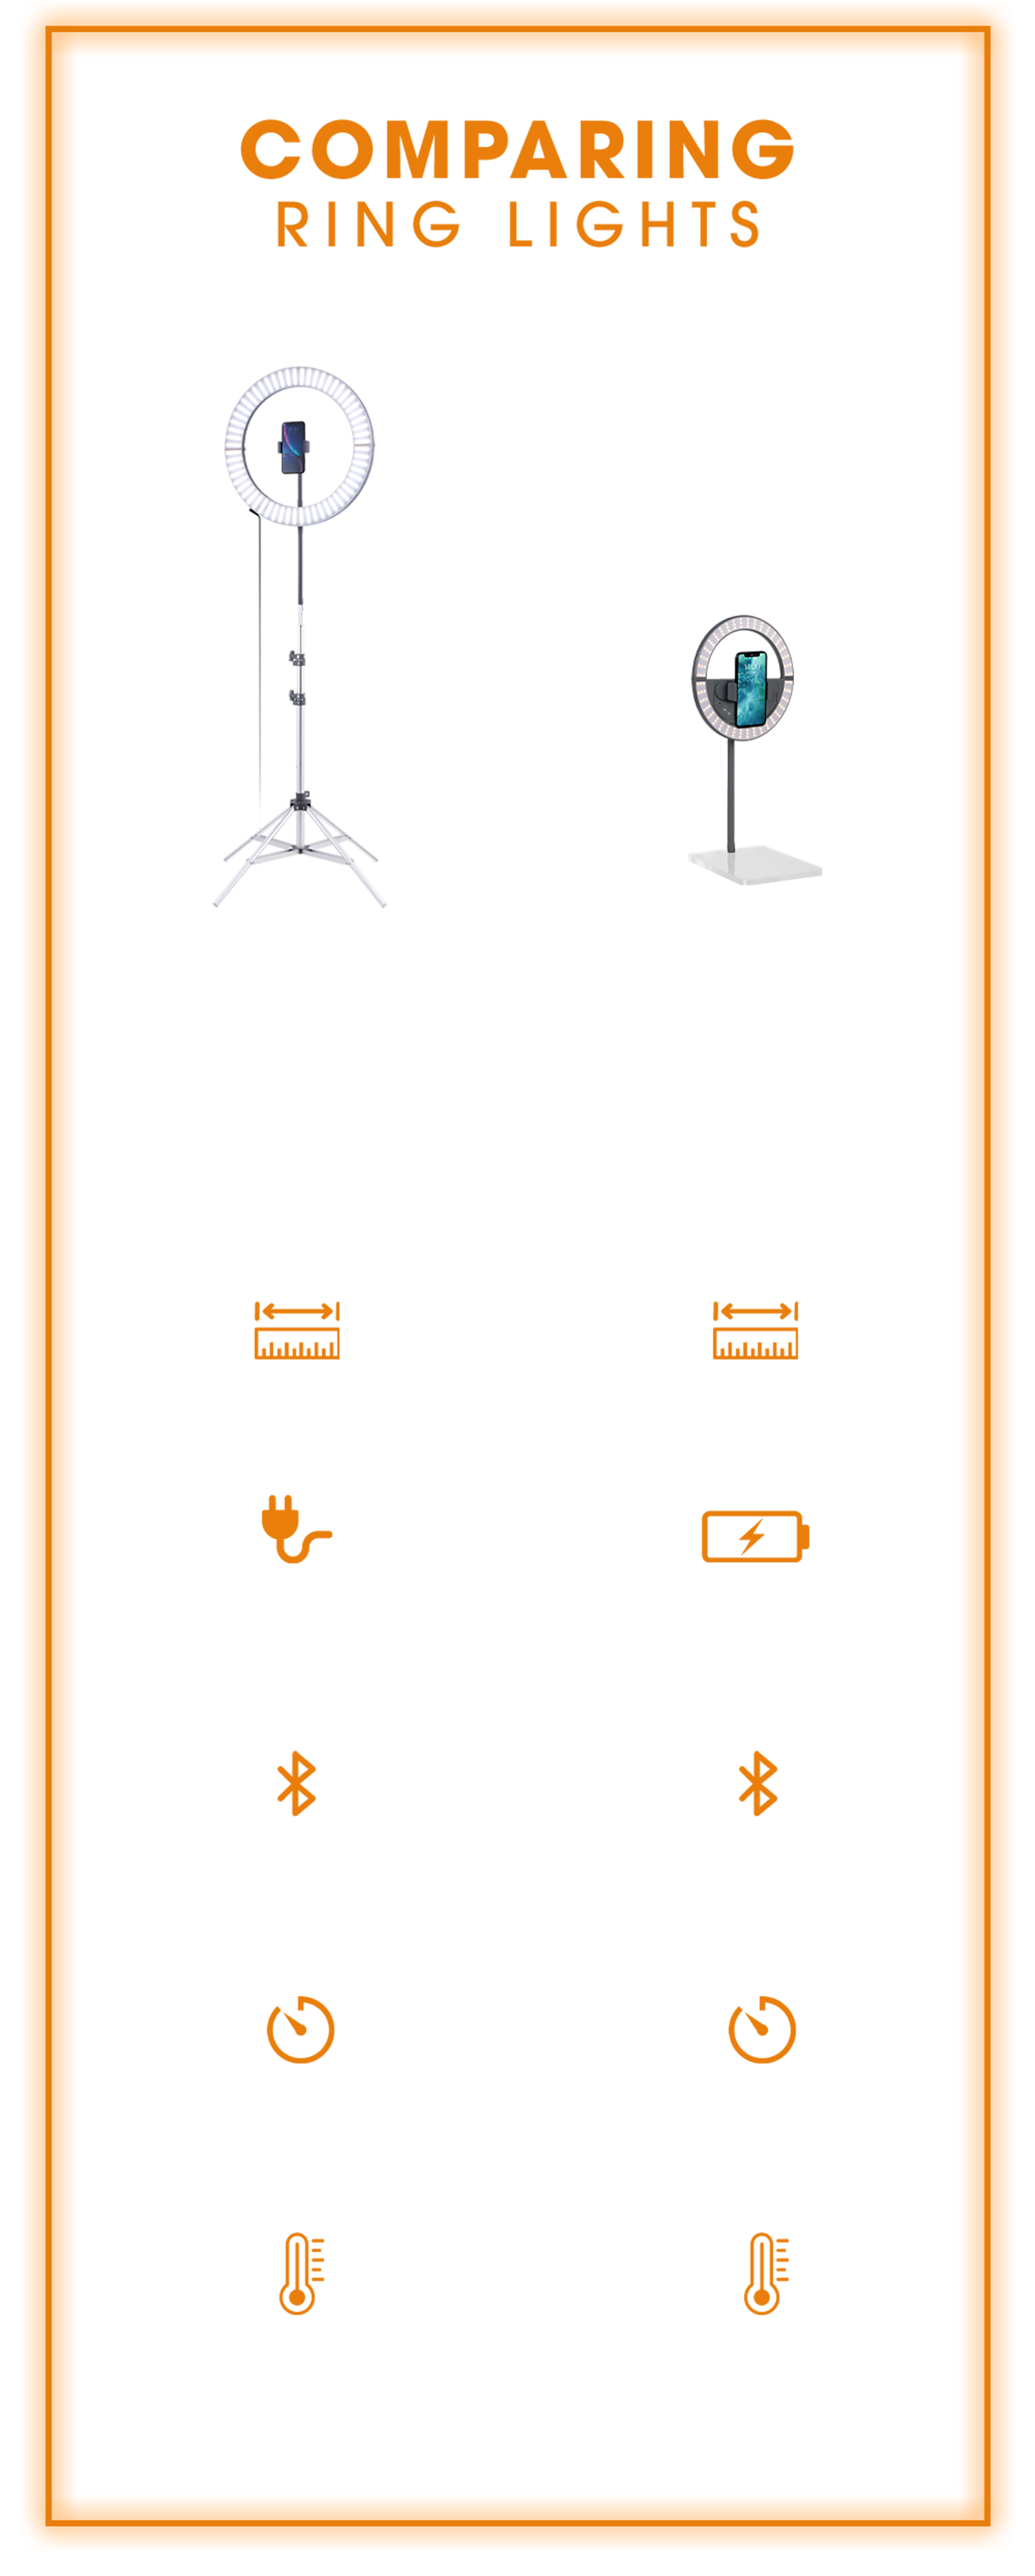 Features comparison between the GALILEO and SUNRISE foldable and travel-friendly ring lights, including price, battery, bluetooth, cool down period and light color temperature.